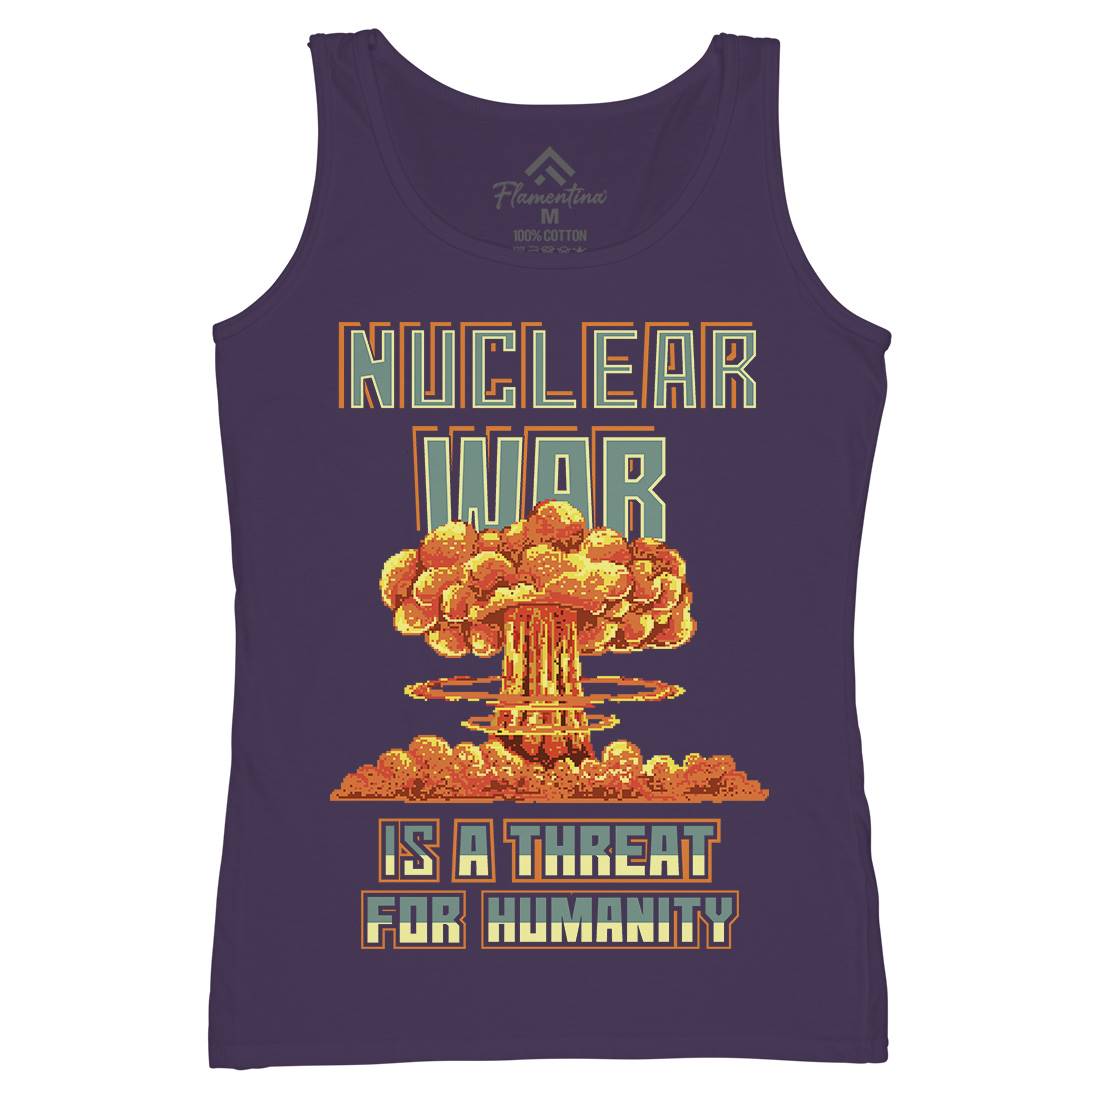 Nuclear War Is A Threat For Humanity Womens Organic Tank Top Vest Army B941